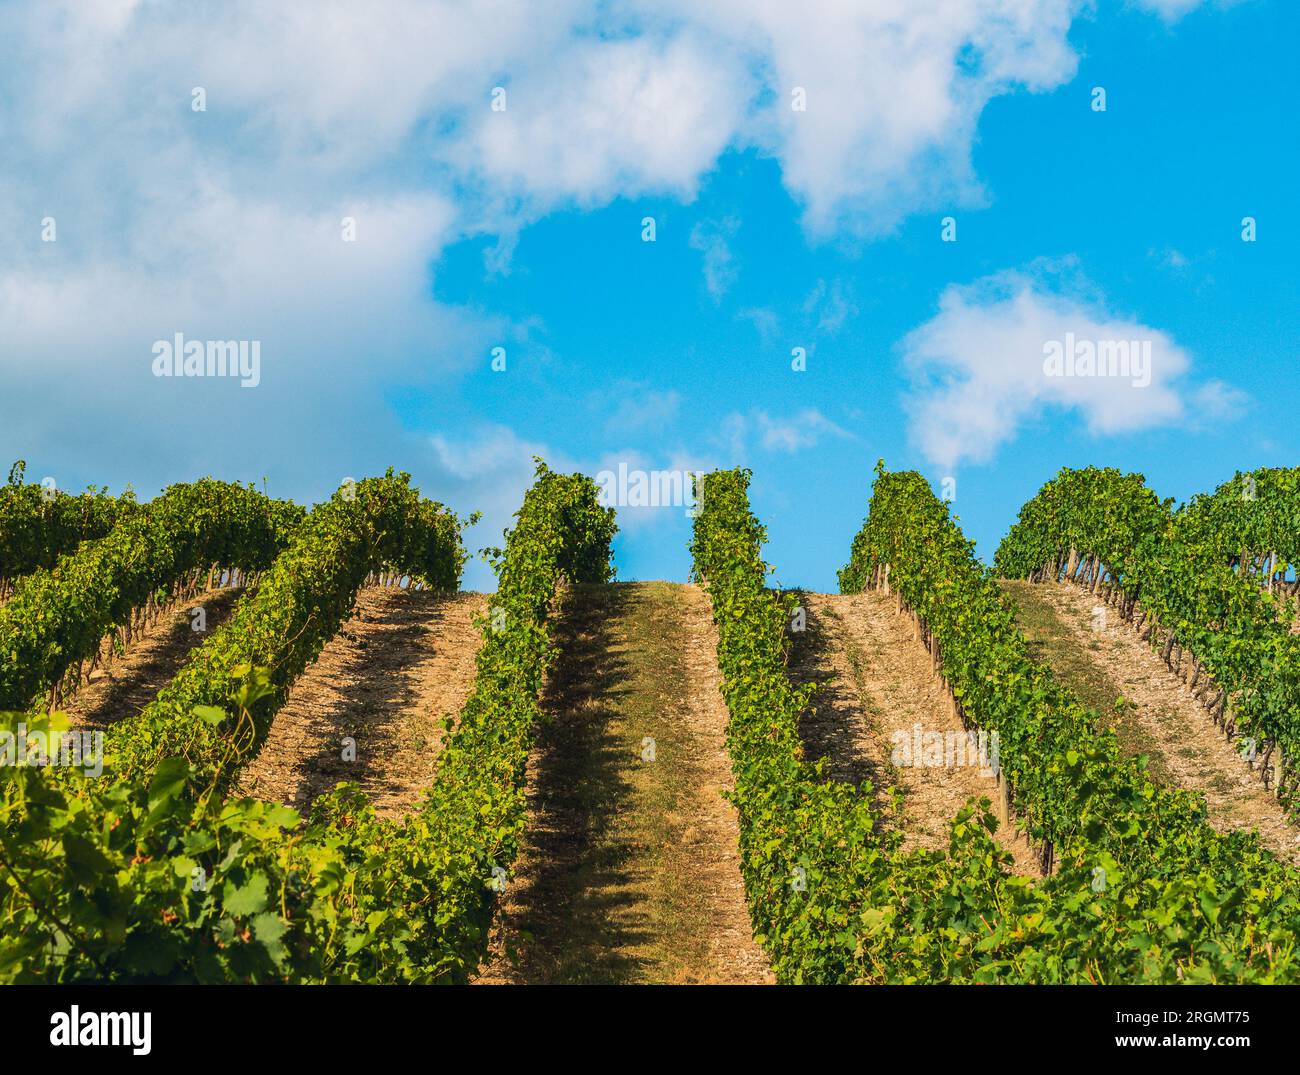 Tidy rows of grapes ripening in the glow of the setting sun and mountainous terrain in southern France. Stock Photo